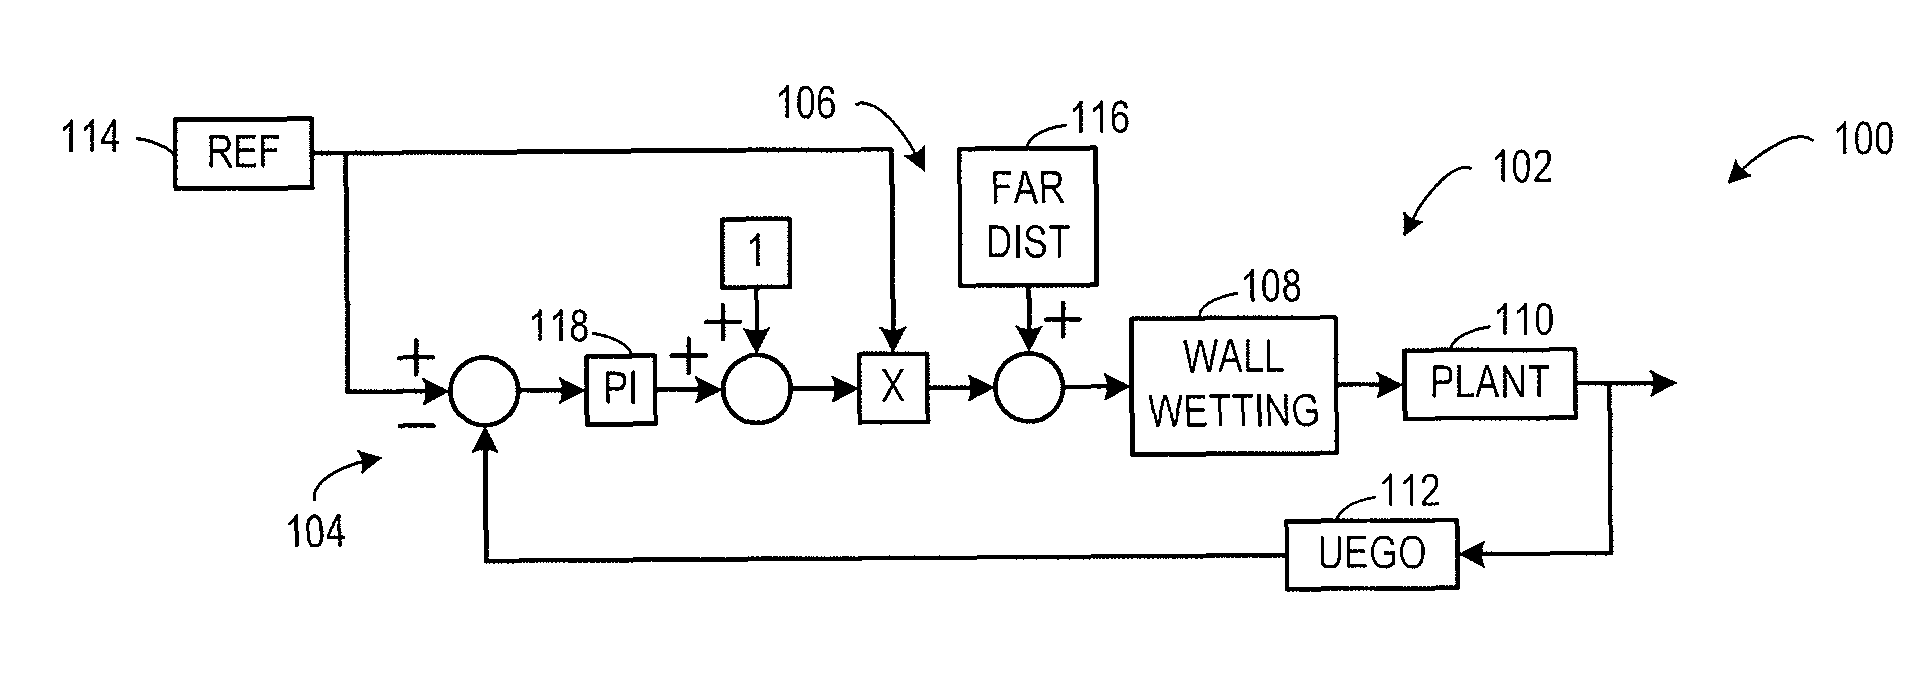 Delay compensated air/fuel control of an internal combustion engine of a vehicle